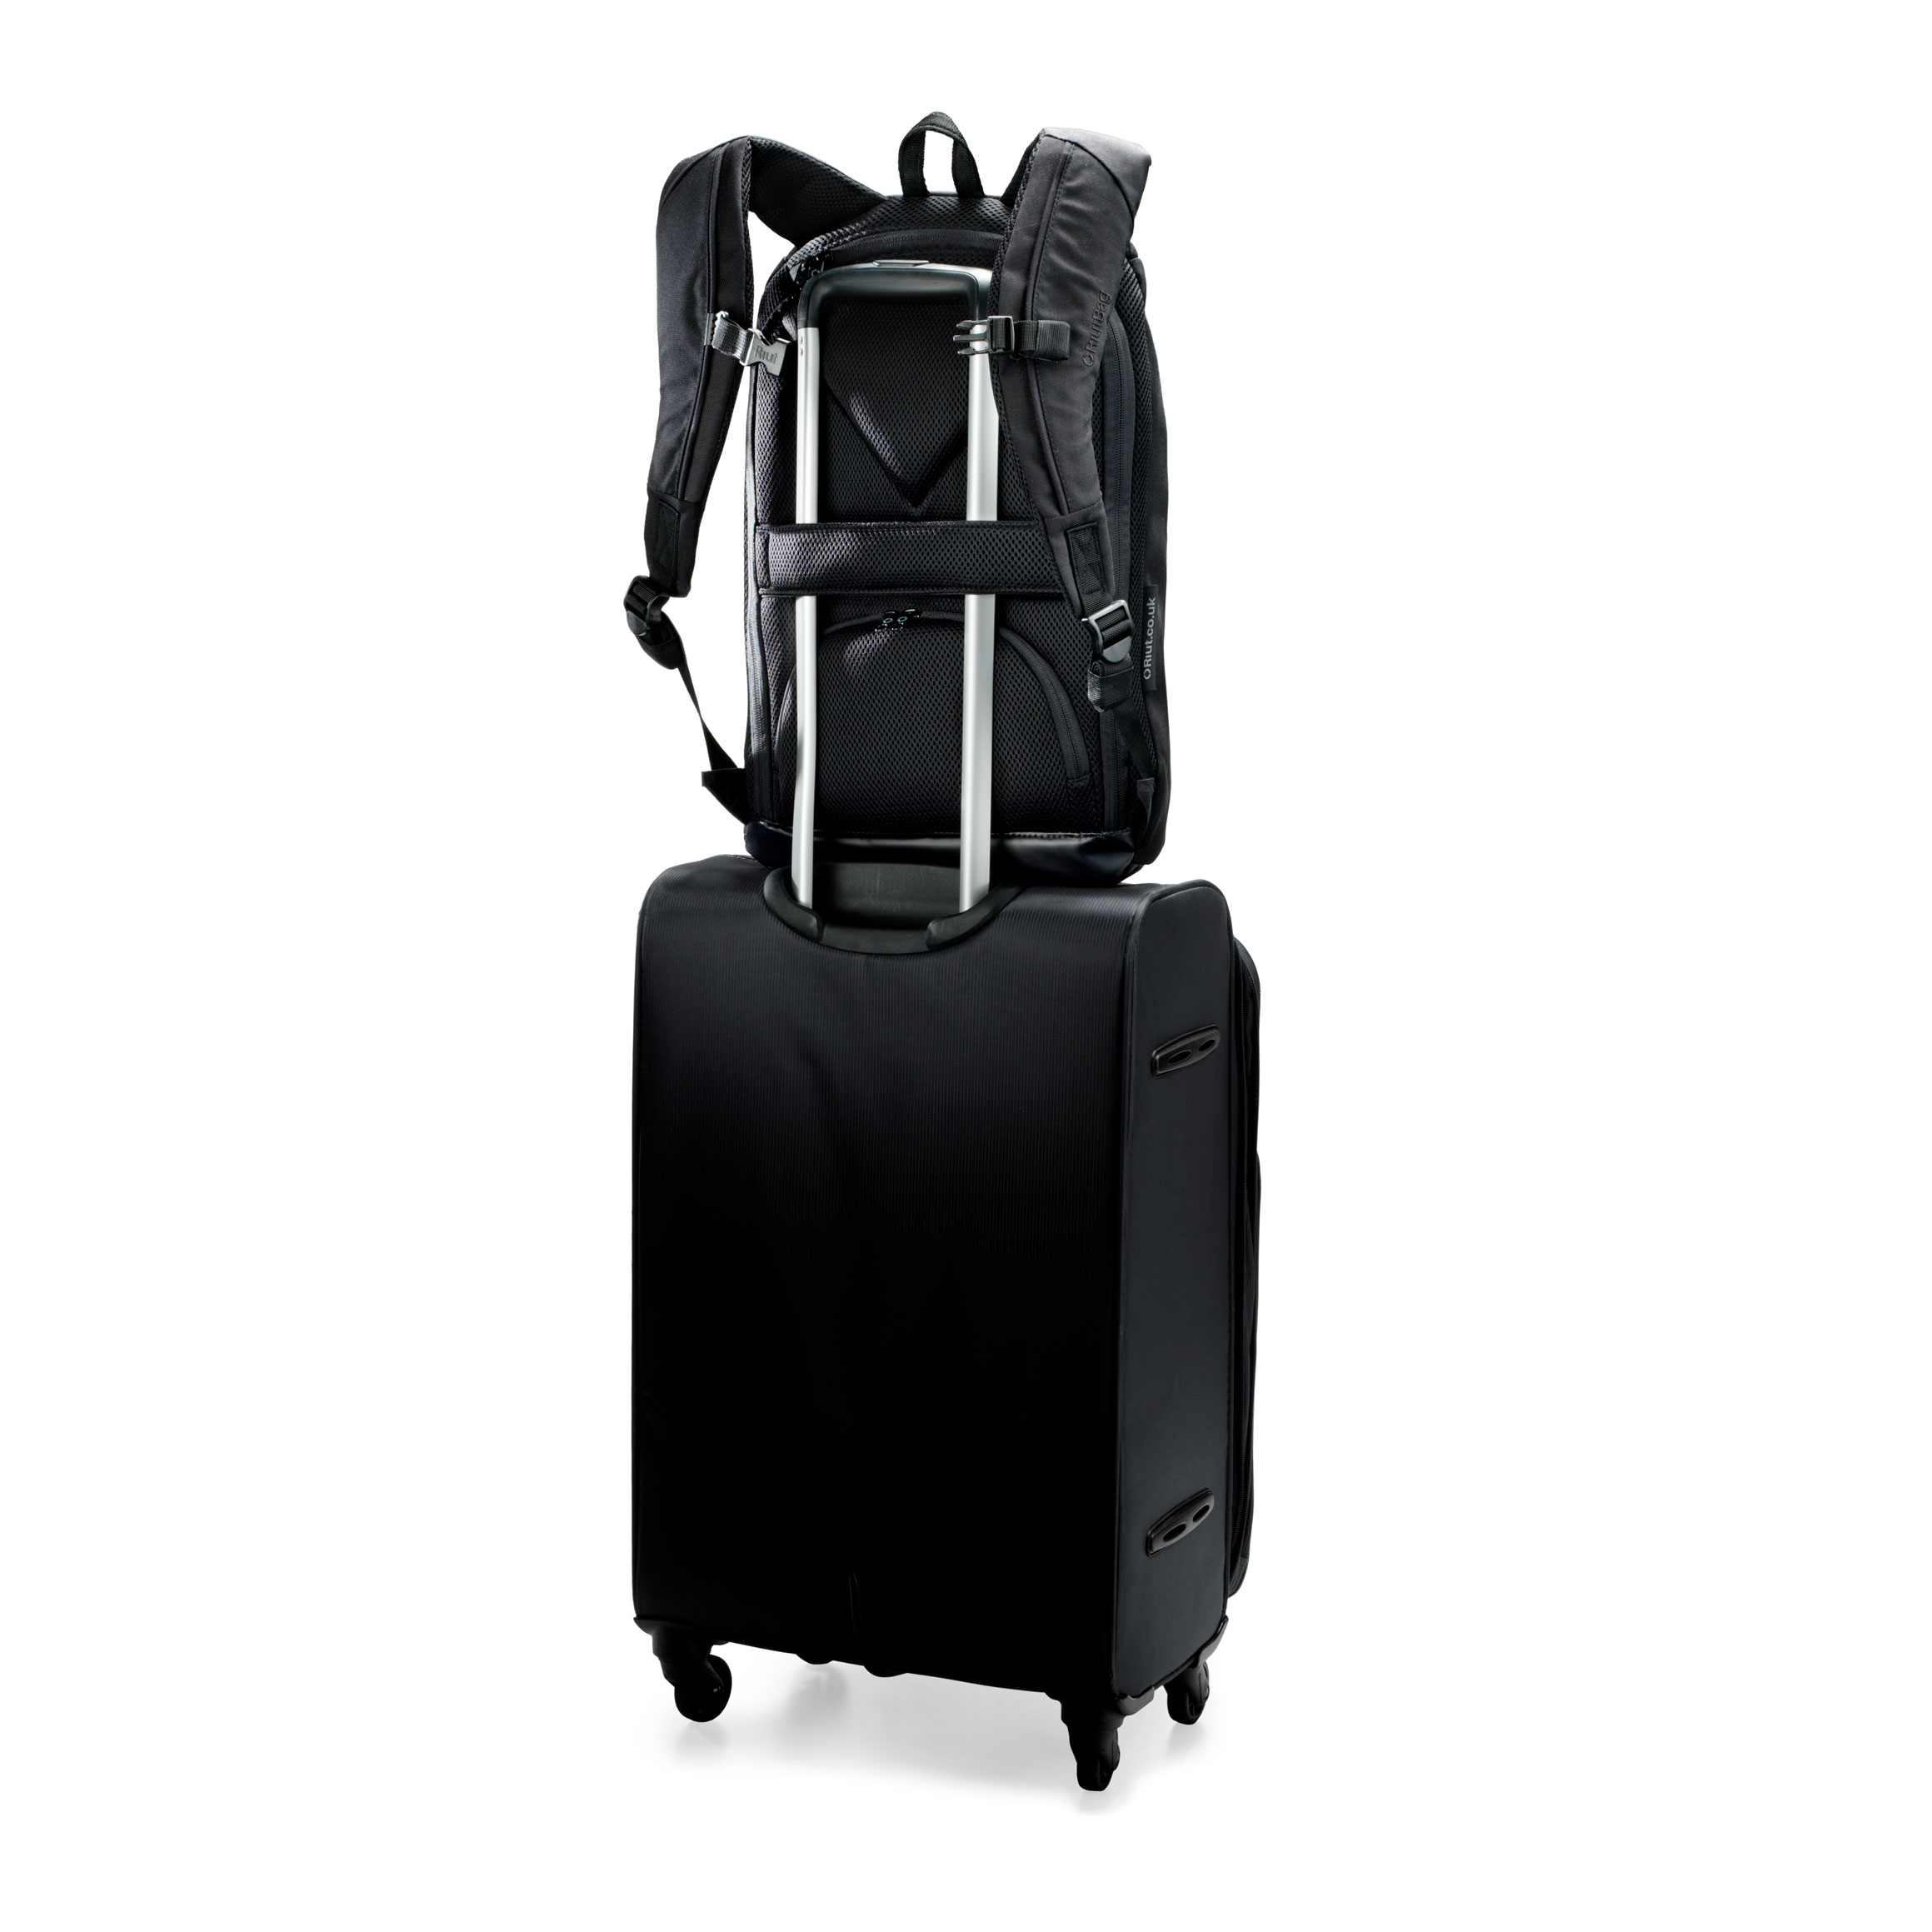 2106 RiutBag R10 with trolley suitcase strap. Travel with ease and stay fresh making your way through airports and train stations. RiutBag openings stay secure, protected by the suitcase handle